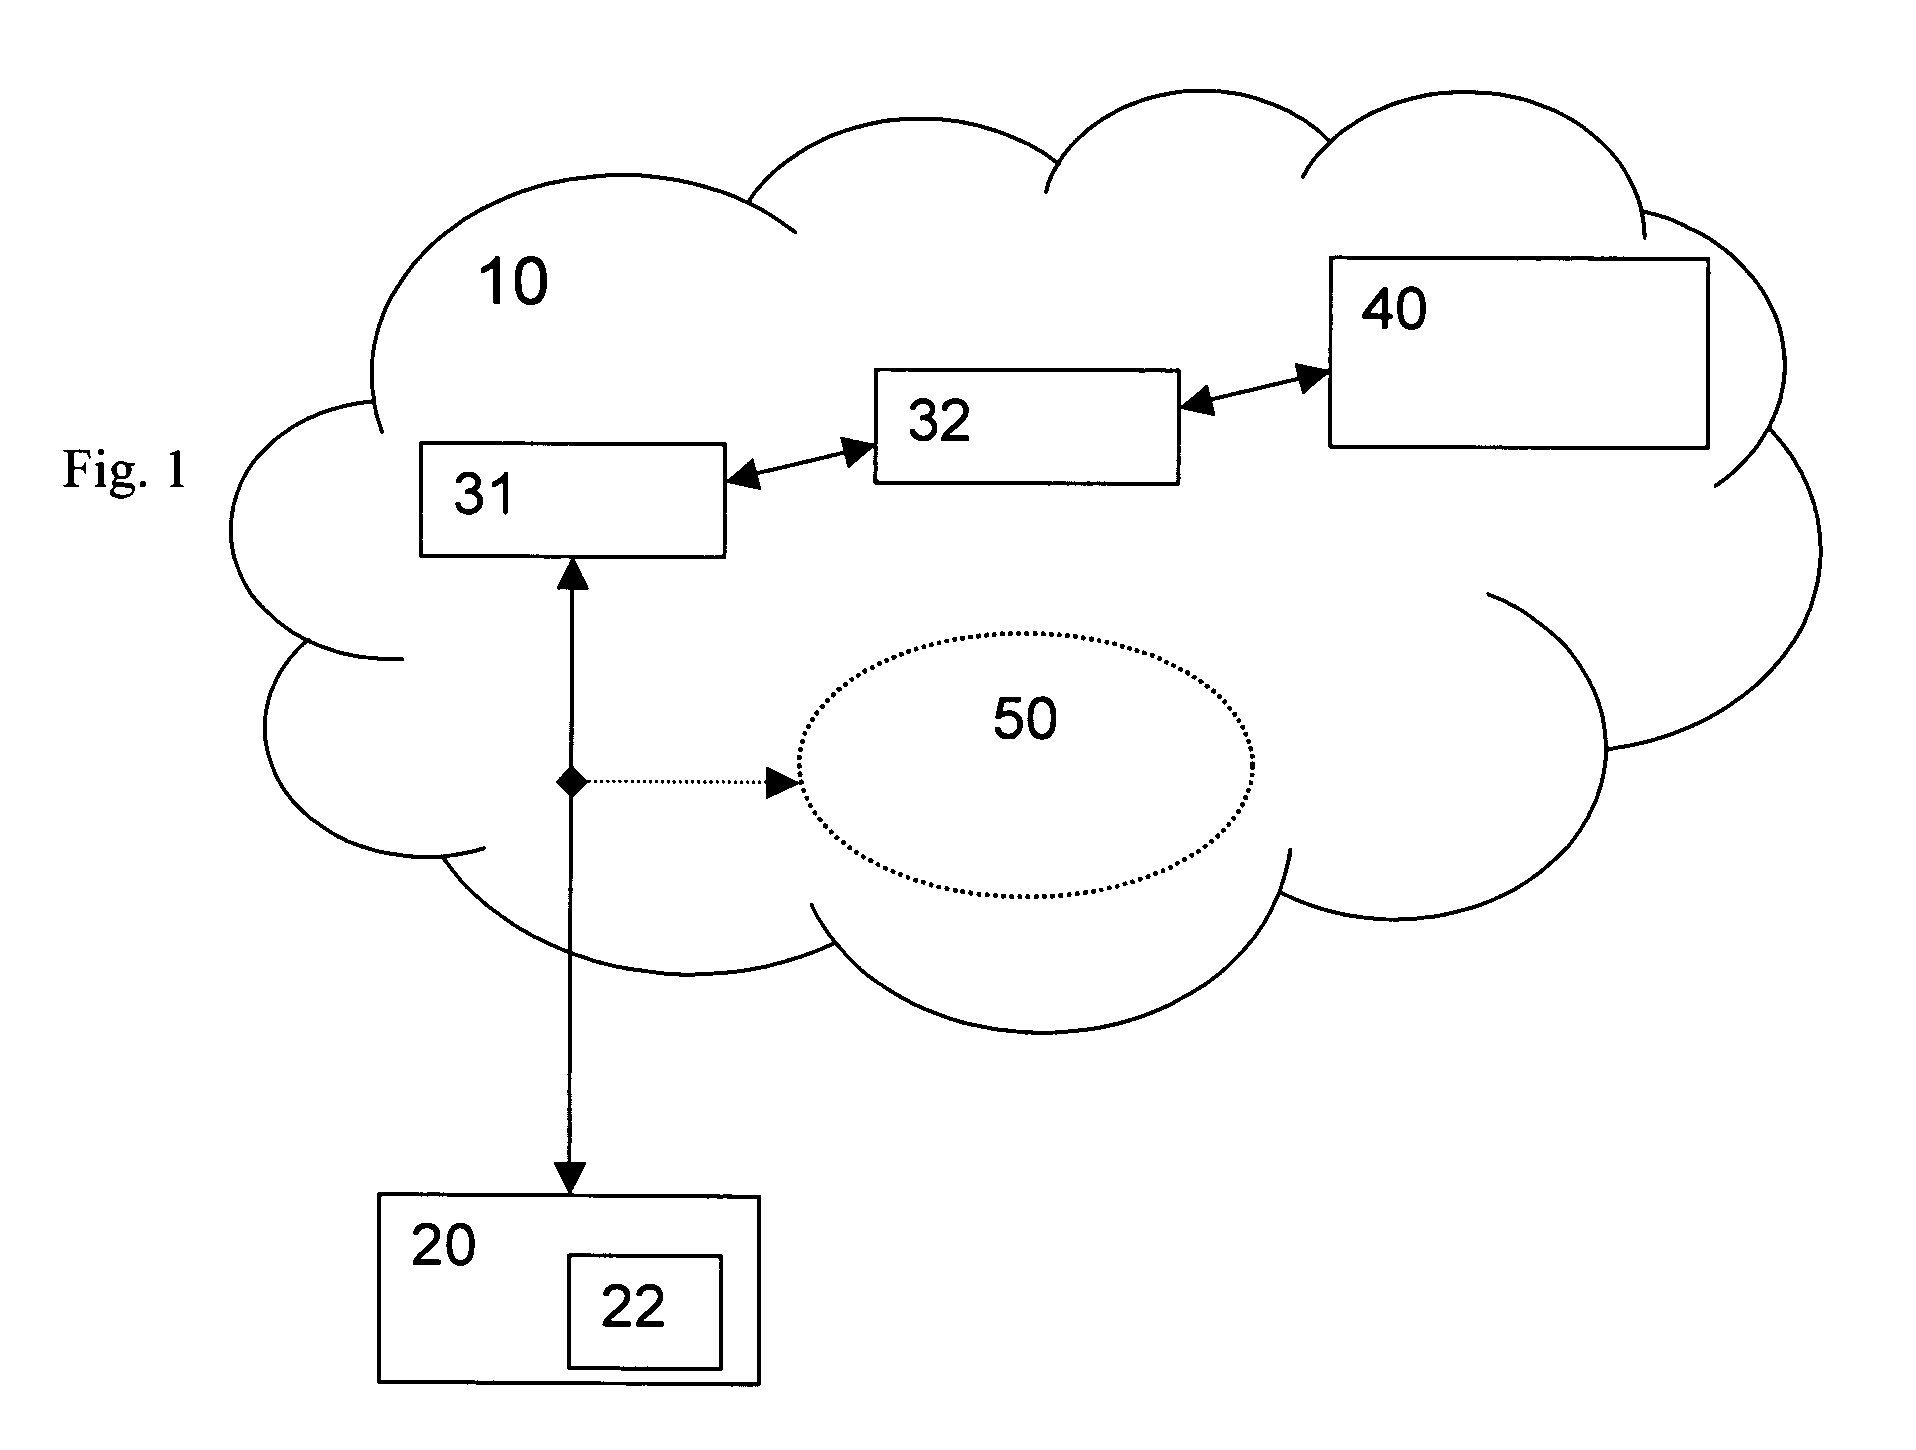 Localized authorization system in IP networks